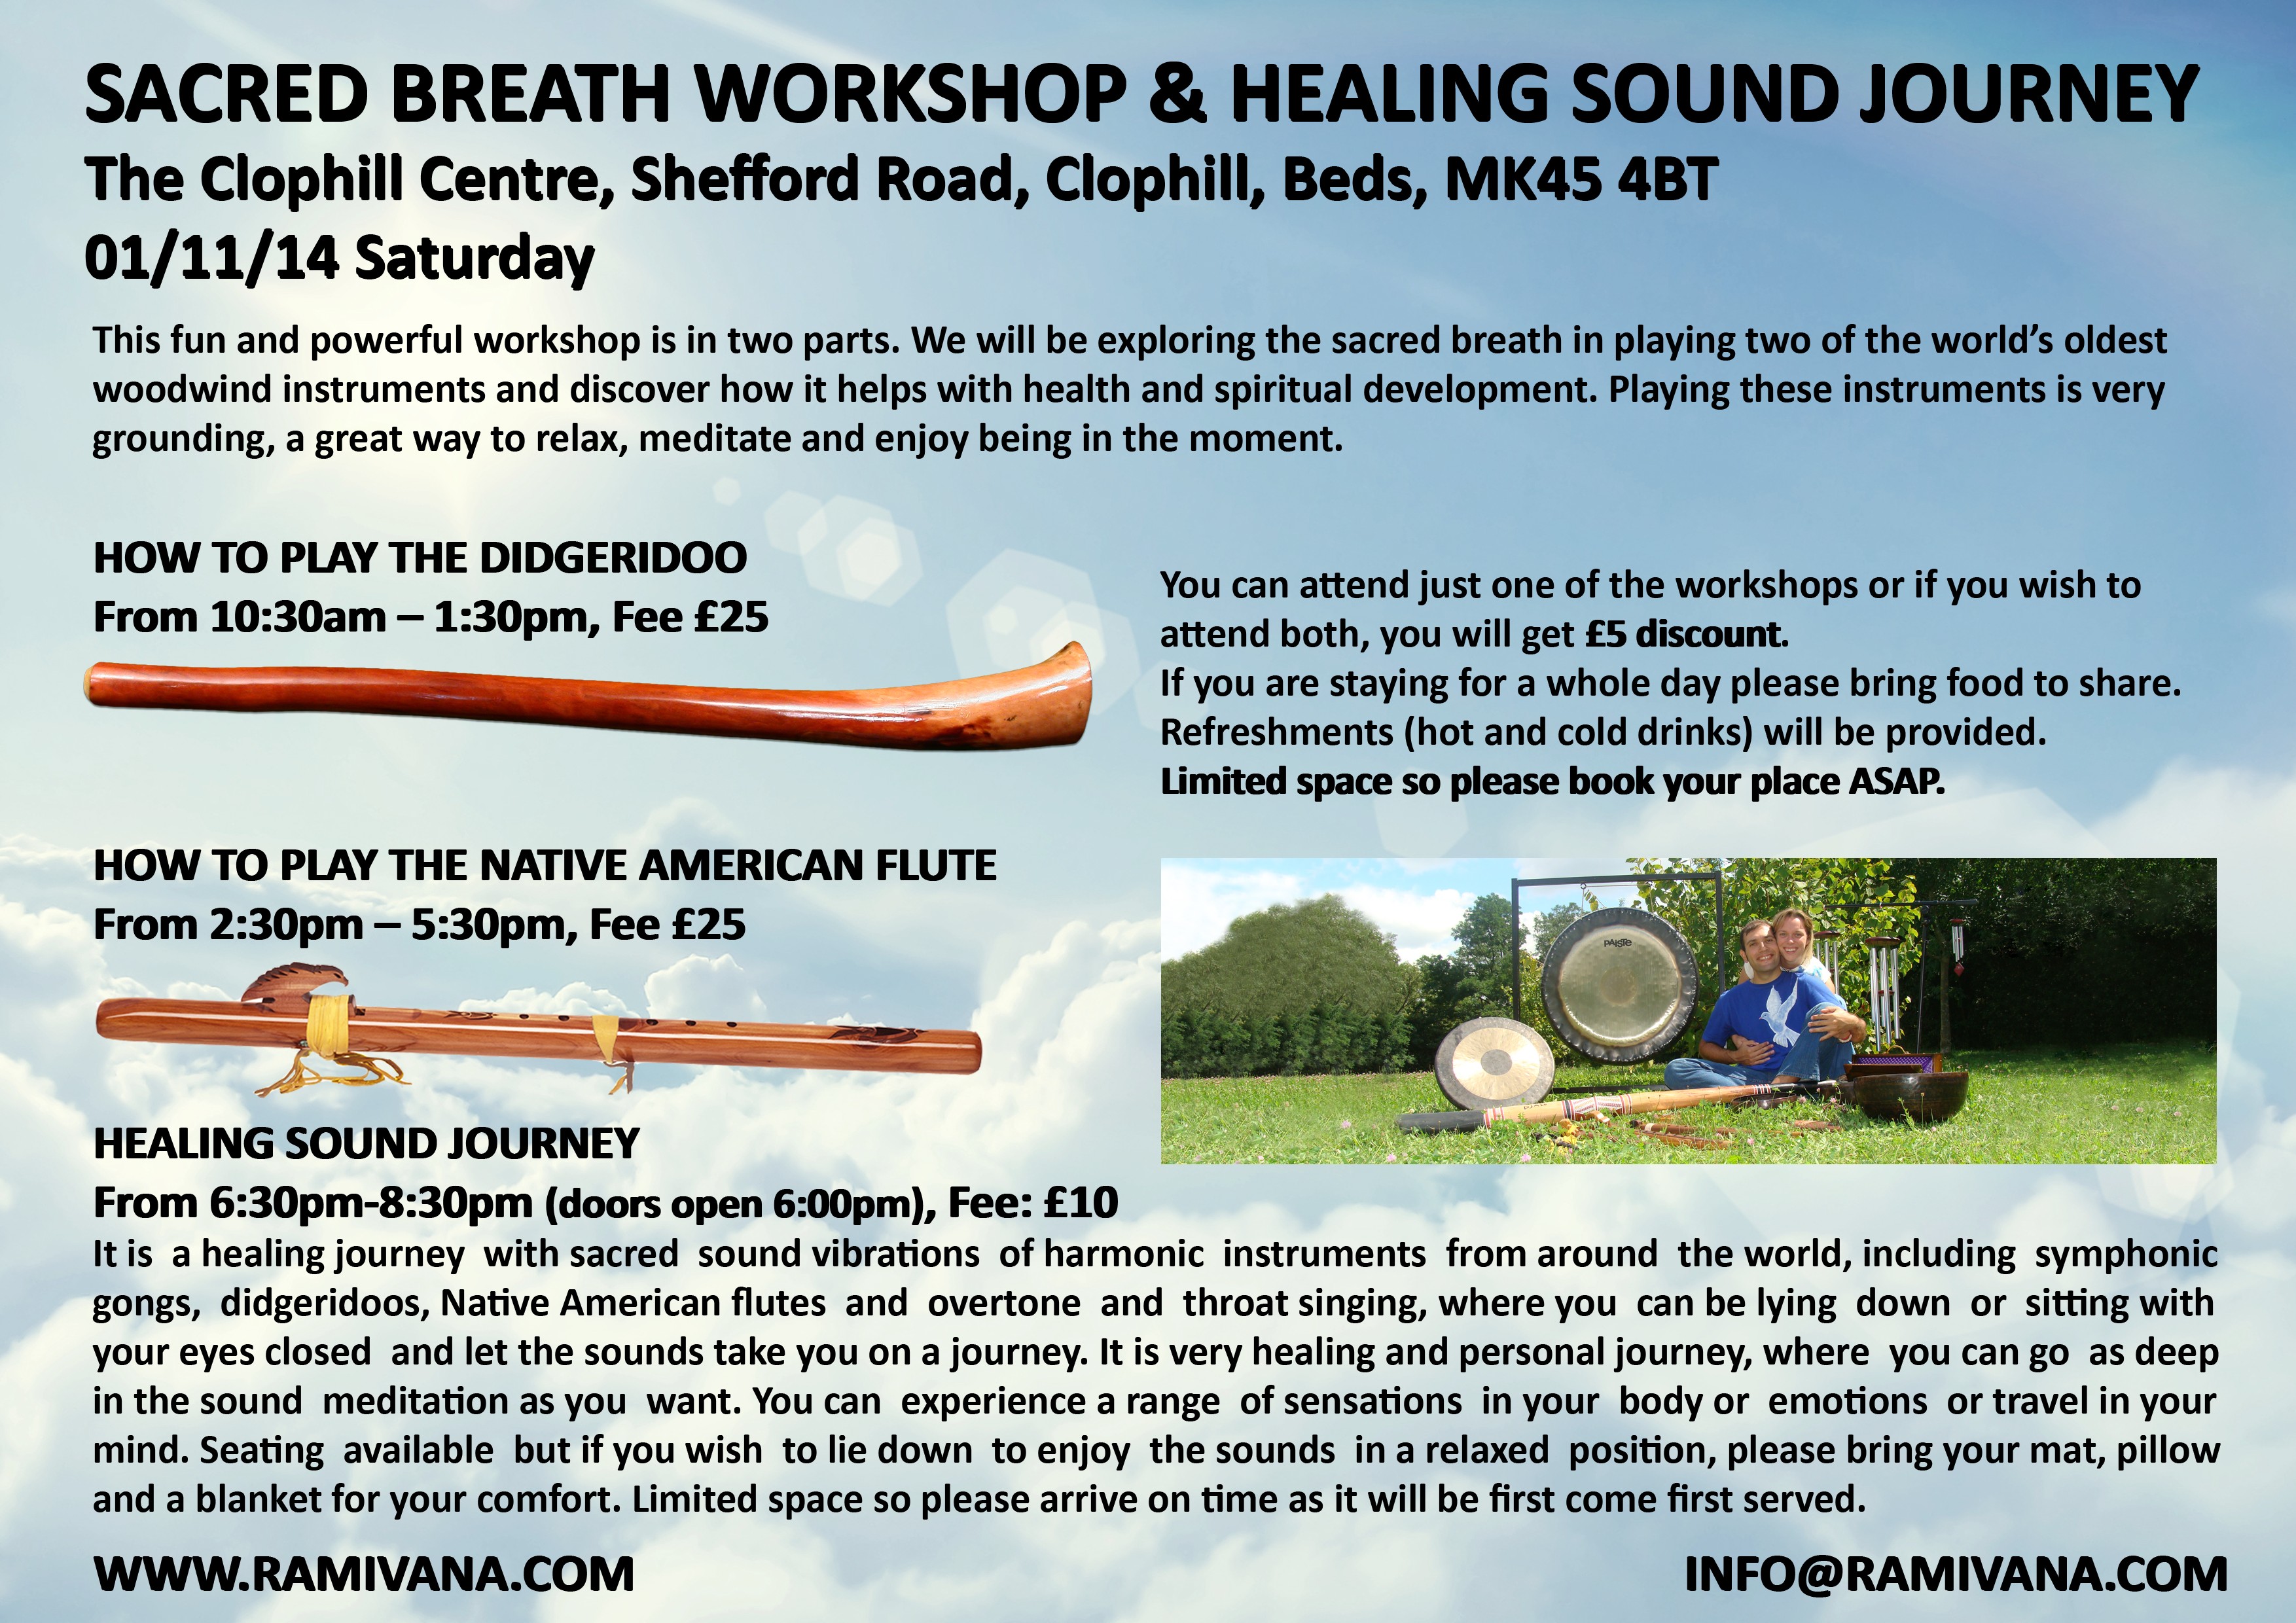 BEDFORDSHIRE - SACRED BREATH WORKSHOP HOW TO PLAY THE NATIVE AMERICAN FLUTE